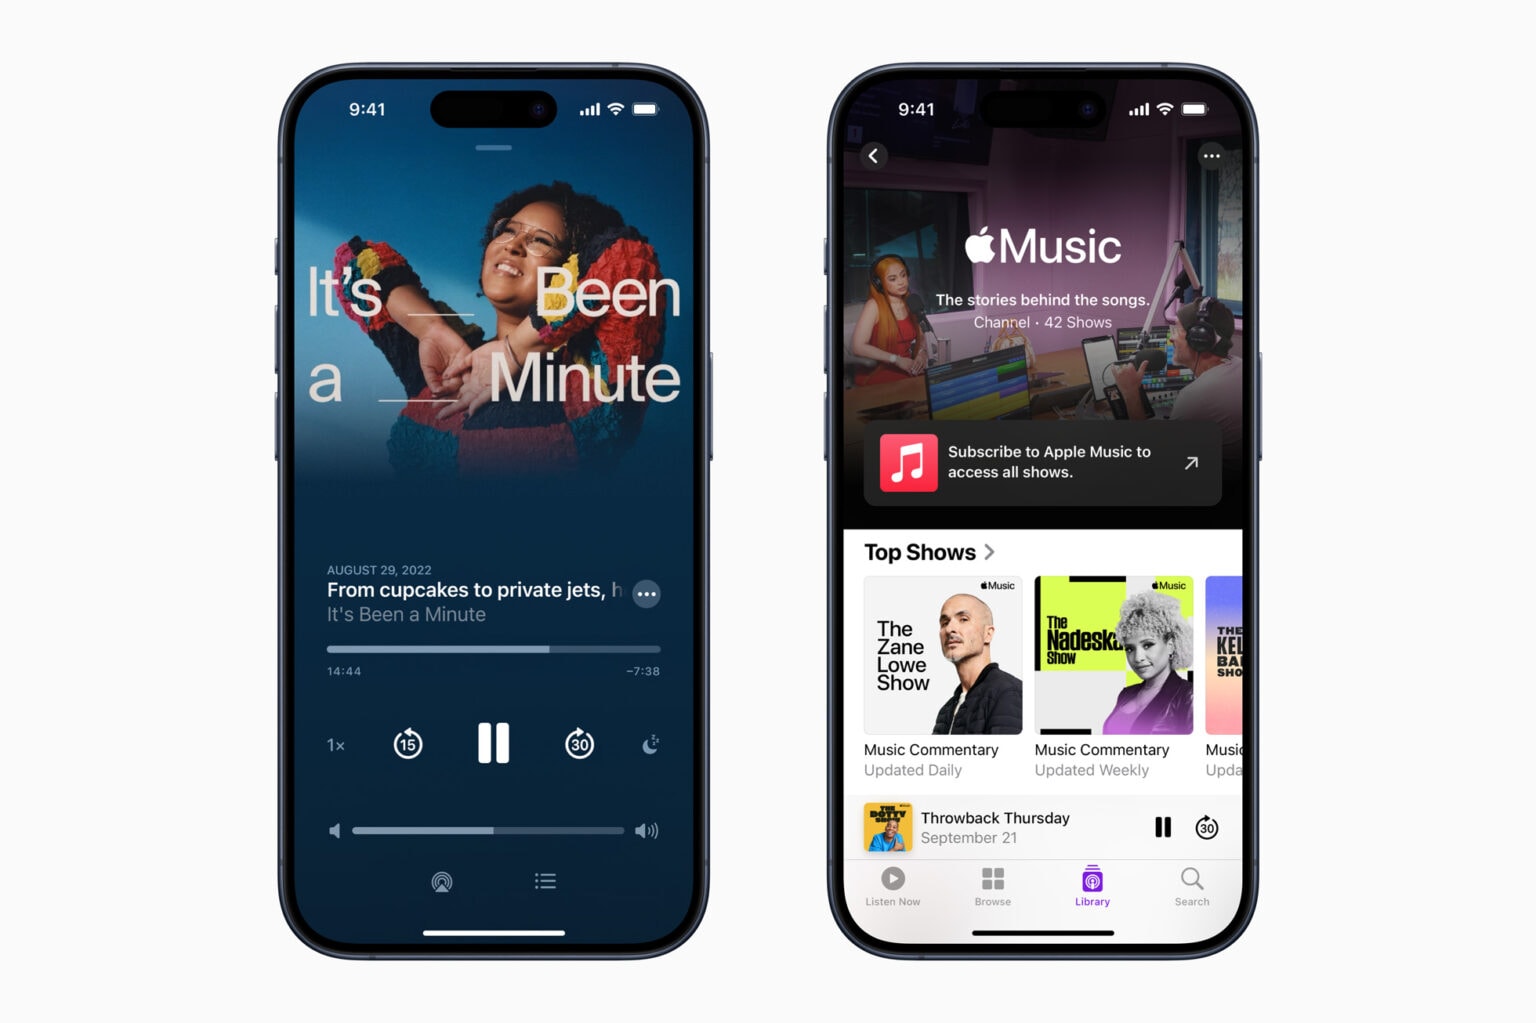 iOS 17 gives Apple Podcasts users a refreshed player and queue, episode art, search filters and the ability to connect subscriptions to top apps.